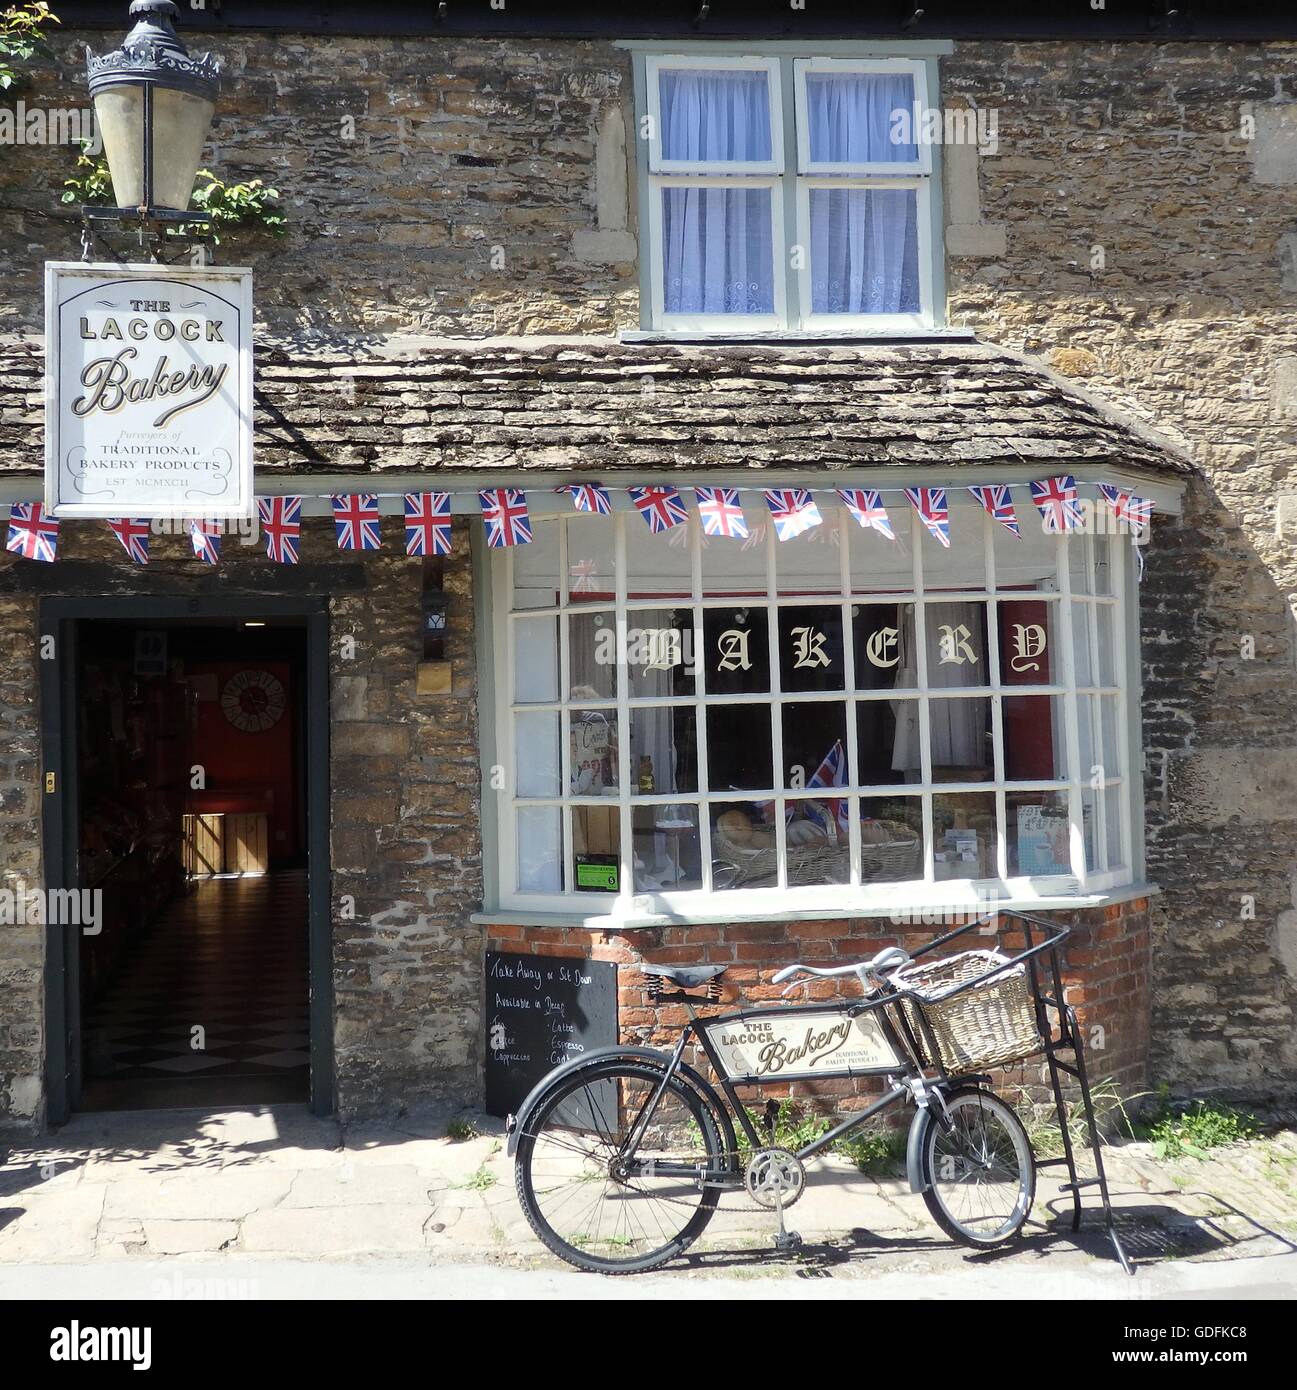 Lacock Bakery with bicycle, Wiltshire in England Stock Photo